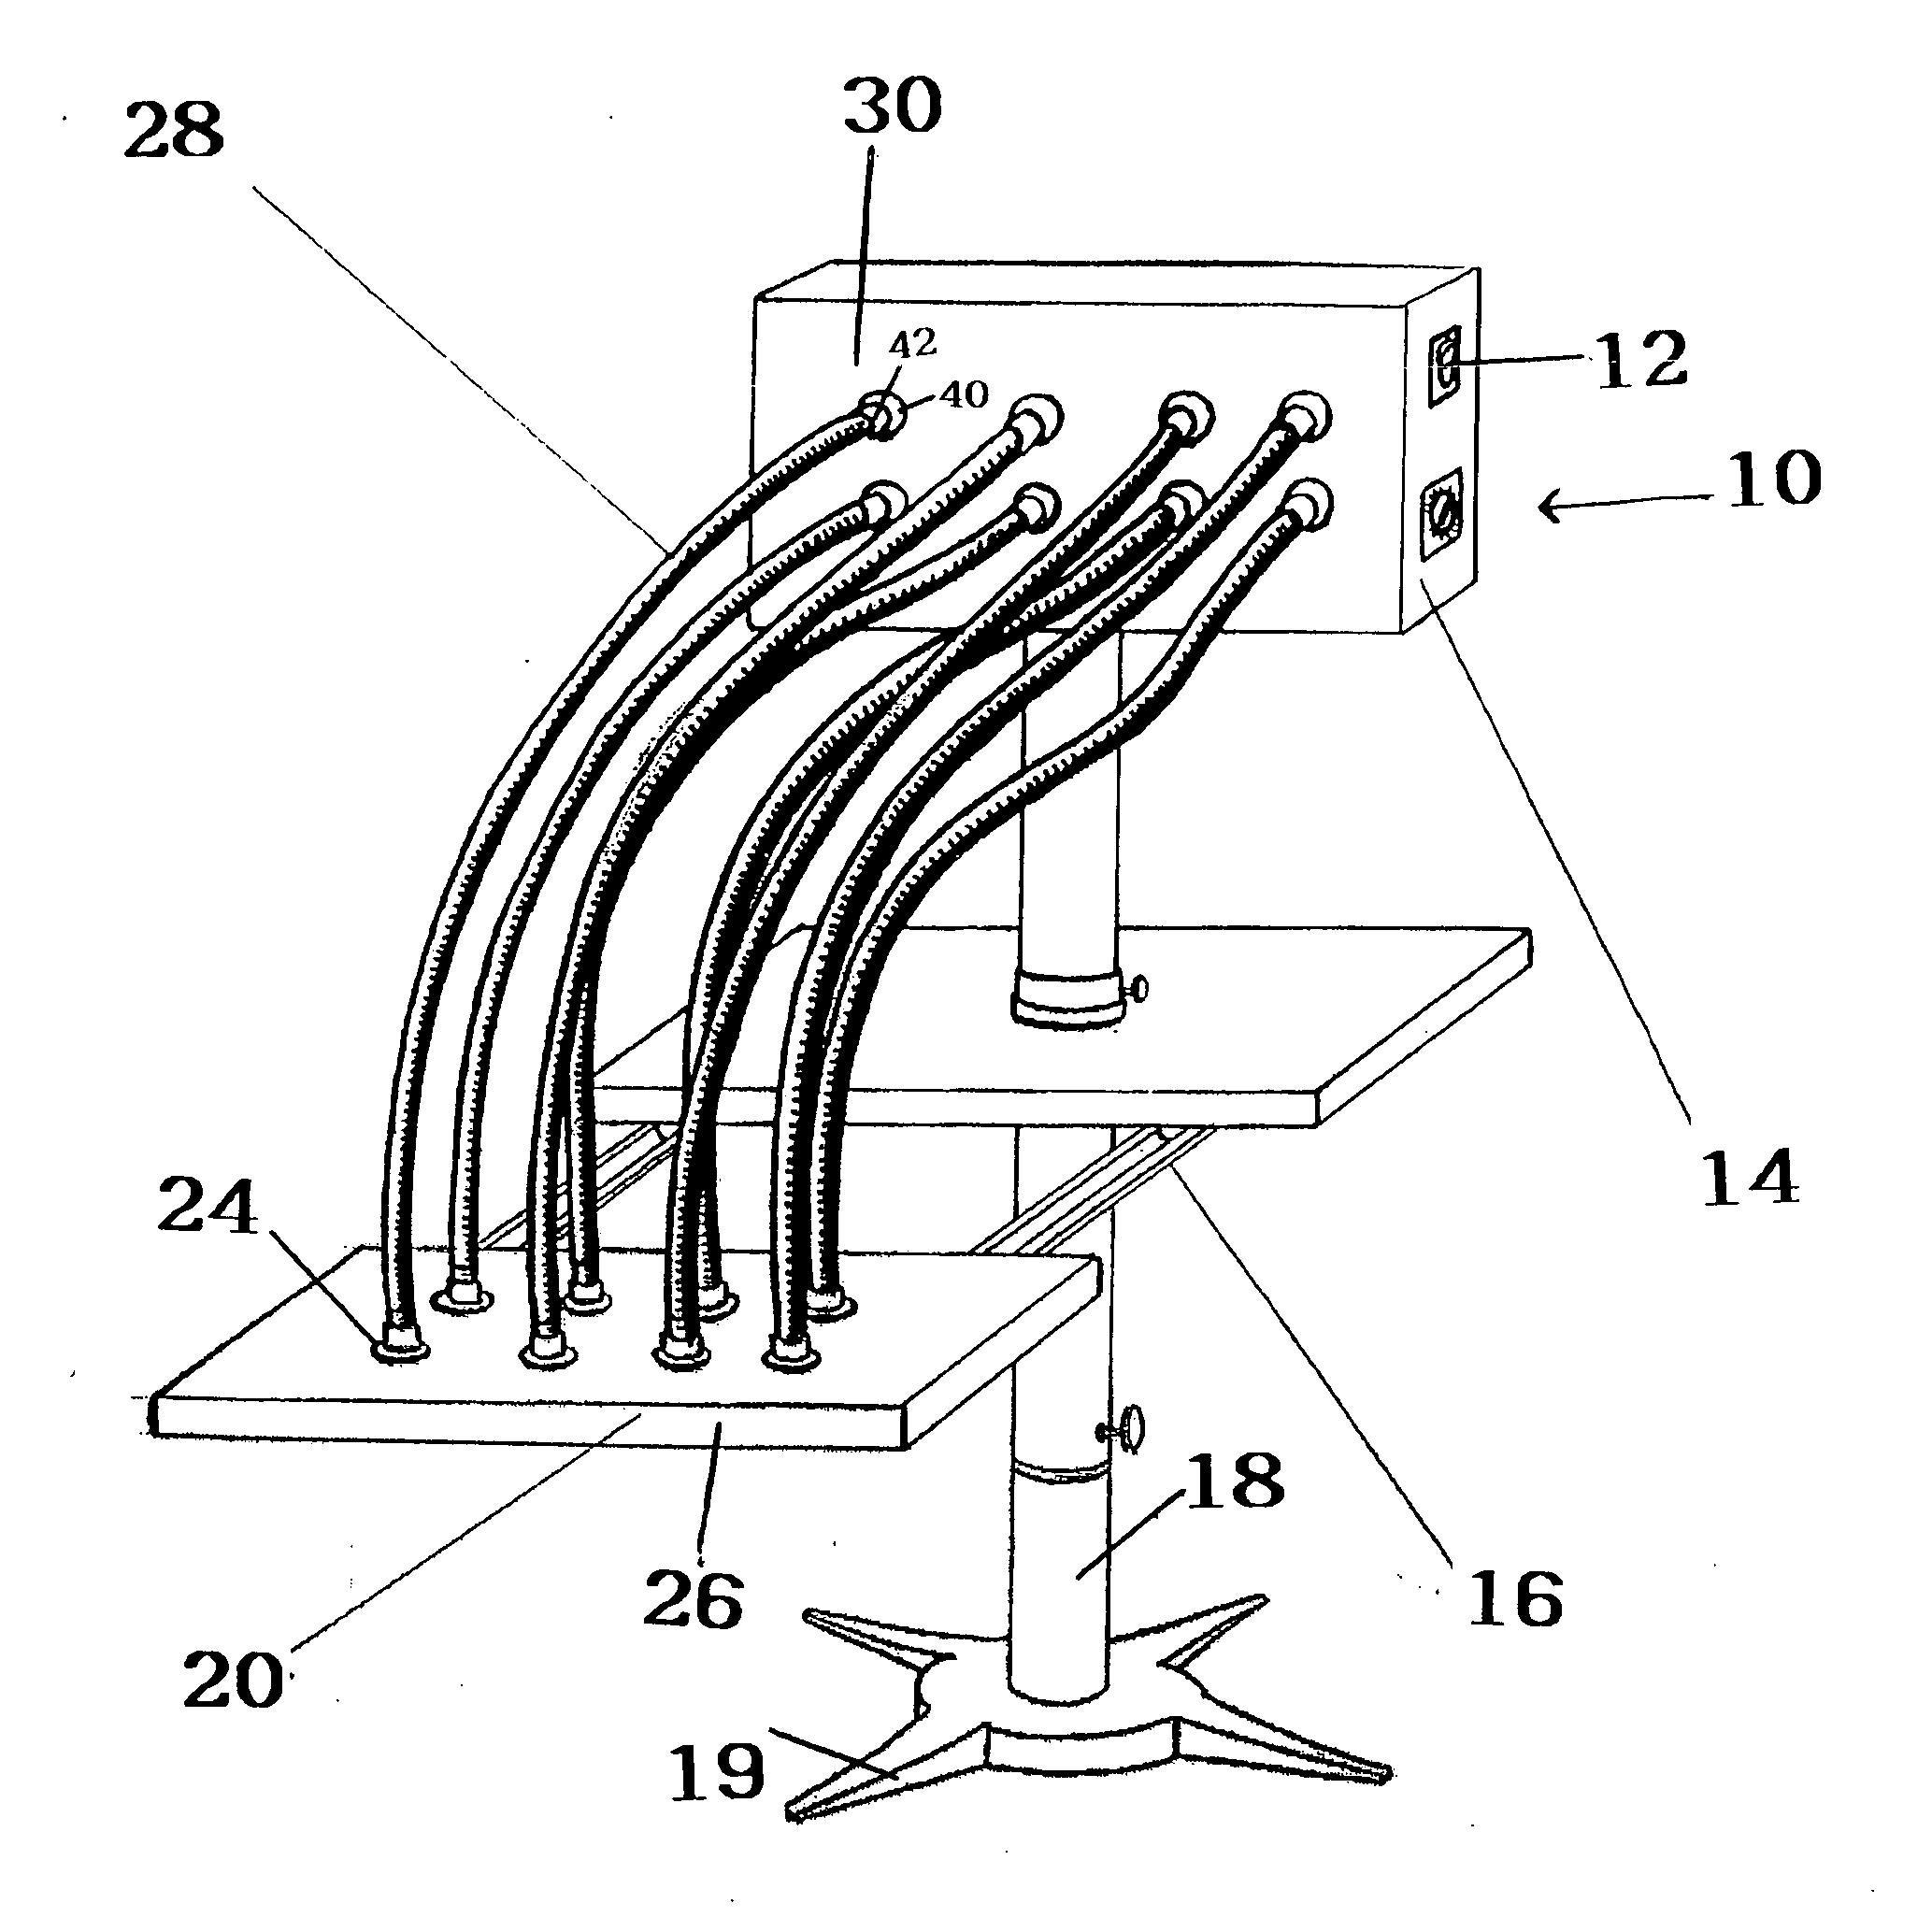 Device for treating infants with light